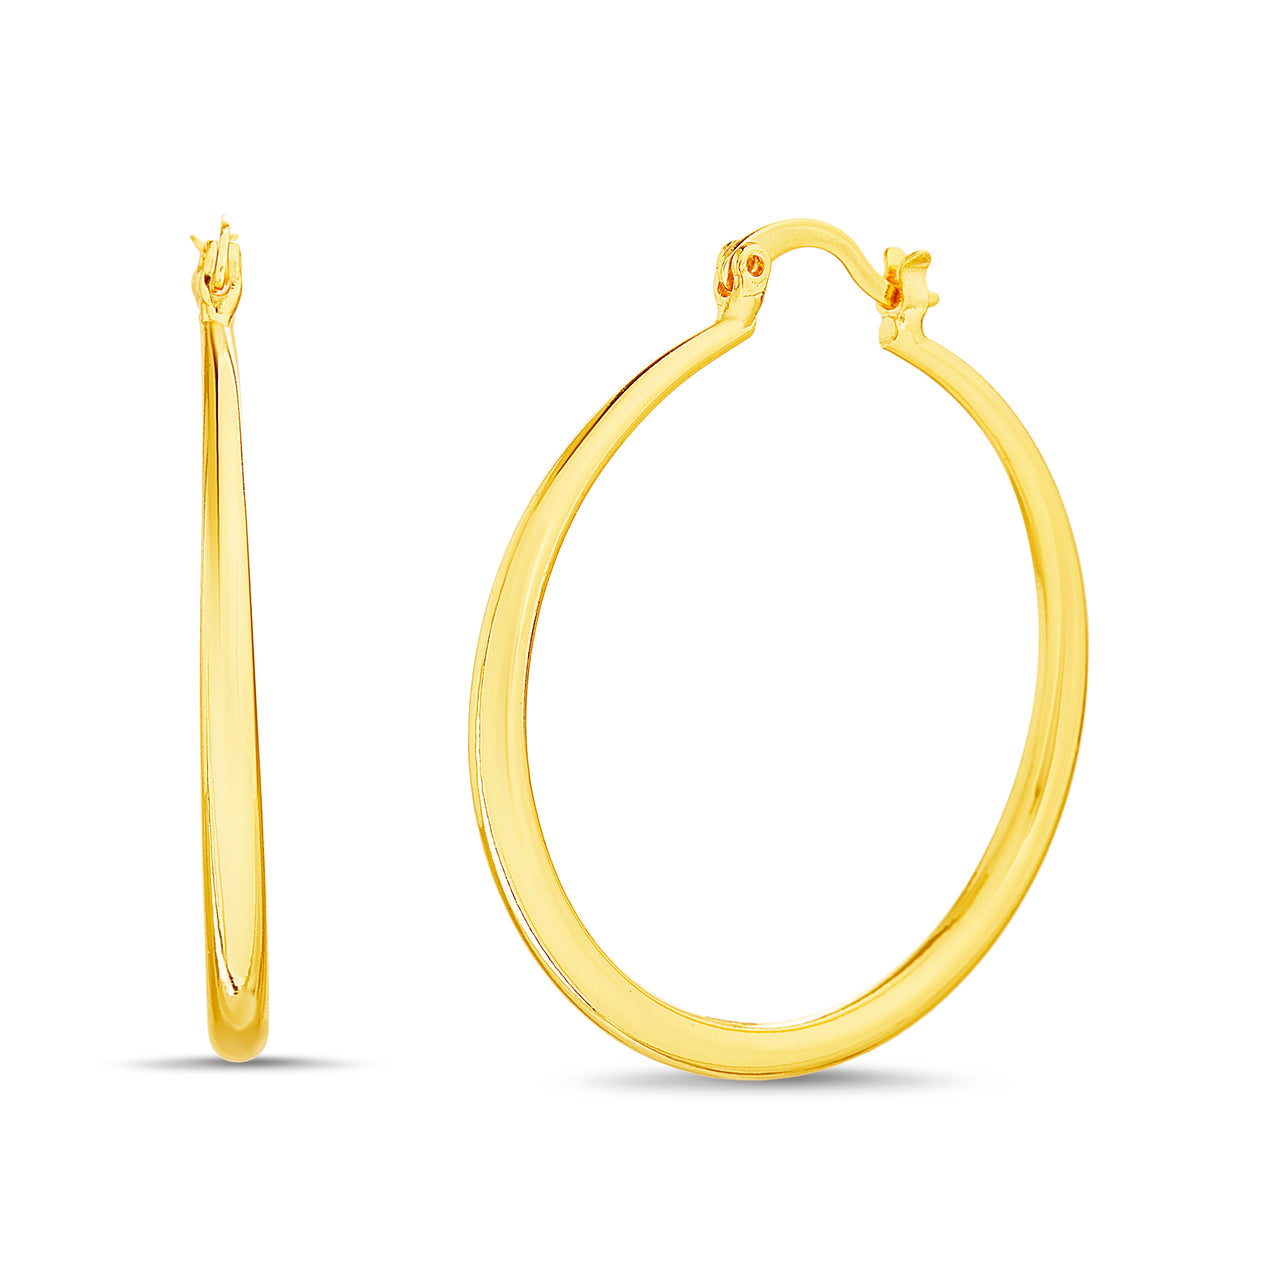 Round Hinge Hoop Earrings in Yellow Gold or Rhodium Plated Brass